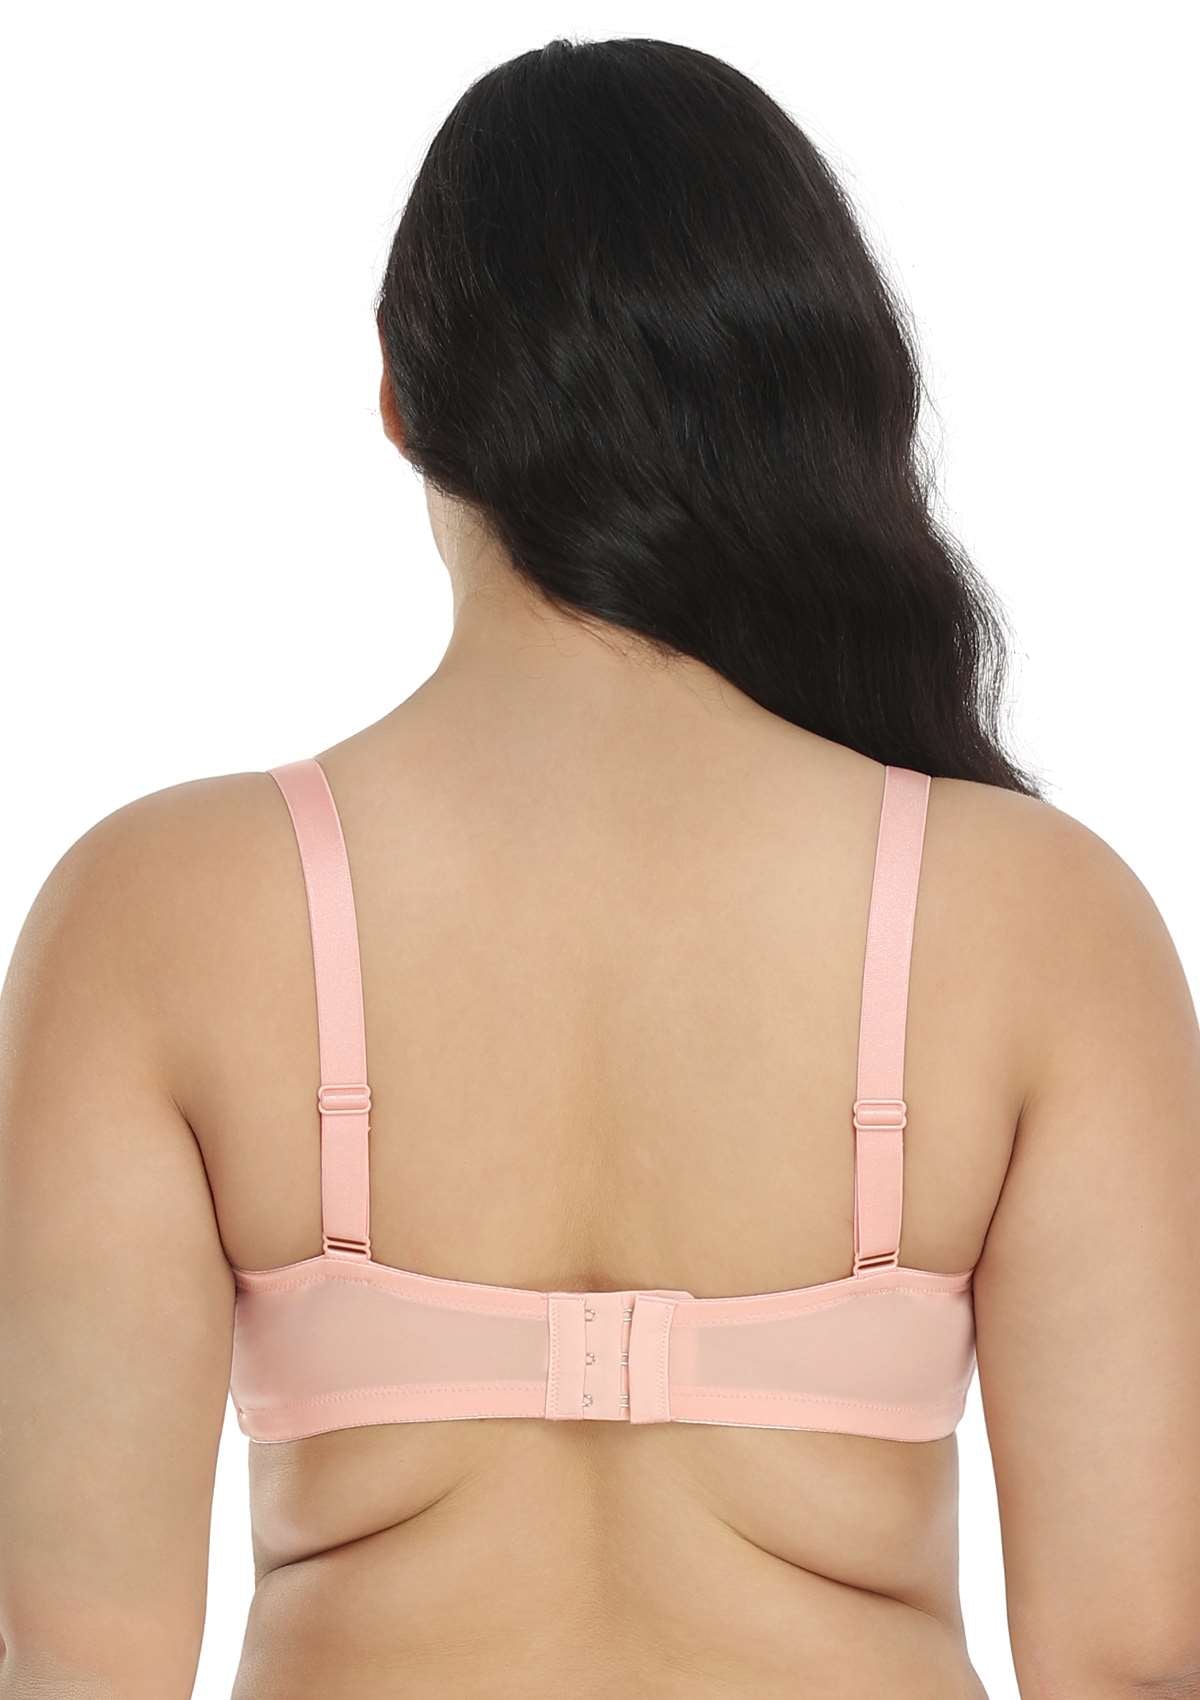 HSIA Rosa Bonica Sheer Lace Mesh Unlined Thin Comfy Woman Bra - Pink / 40 / DDD/F